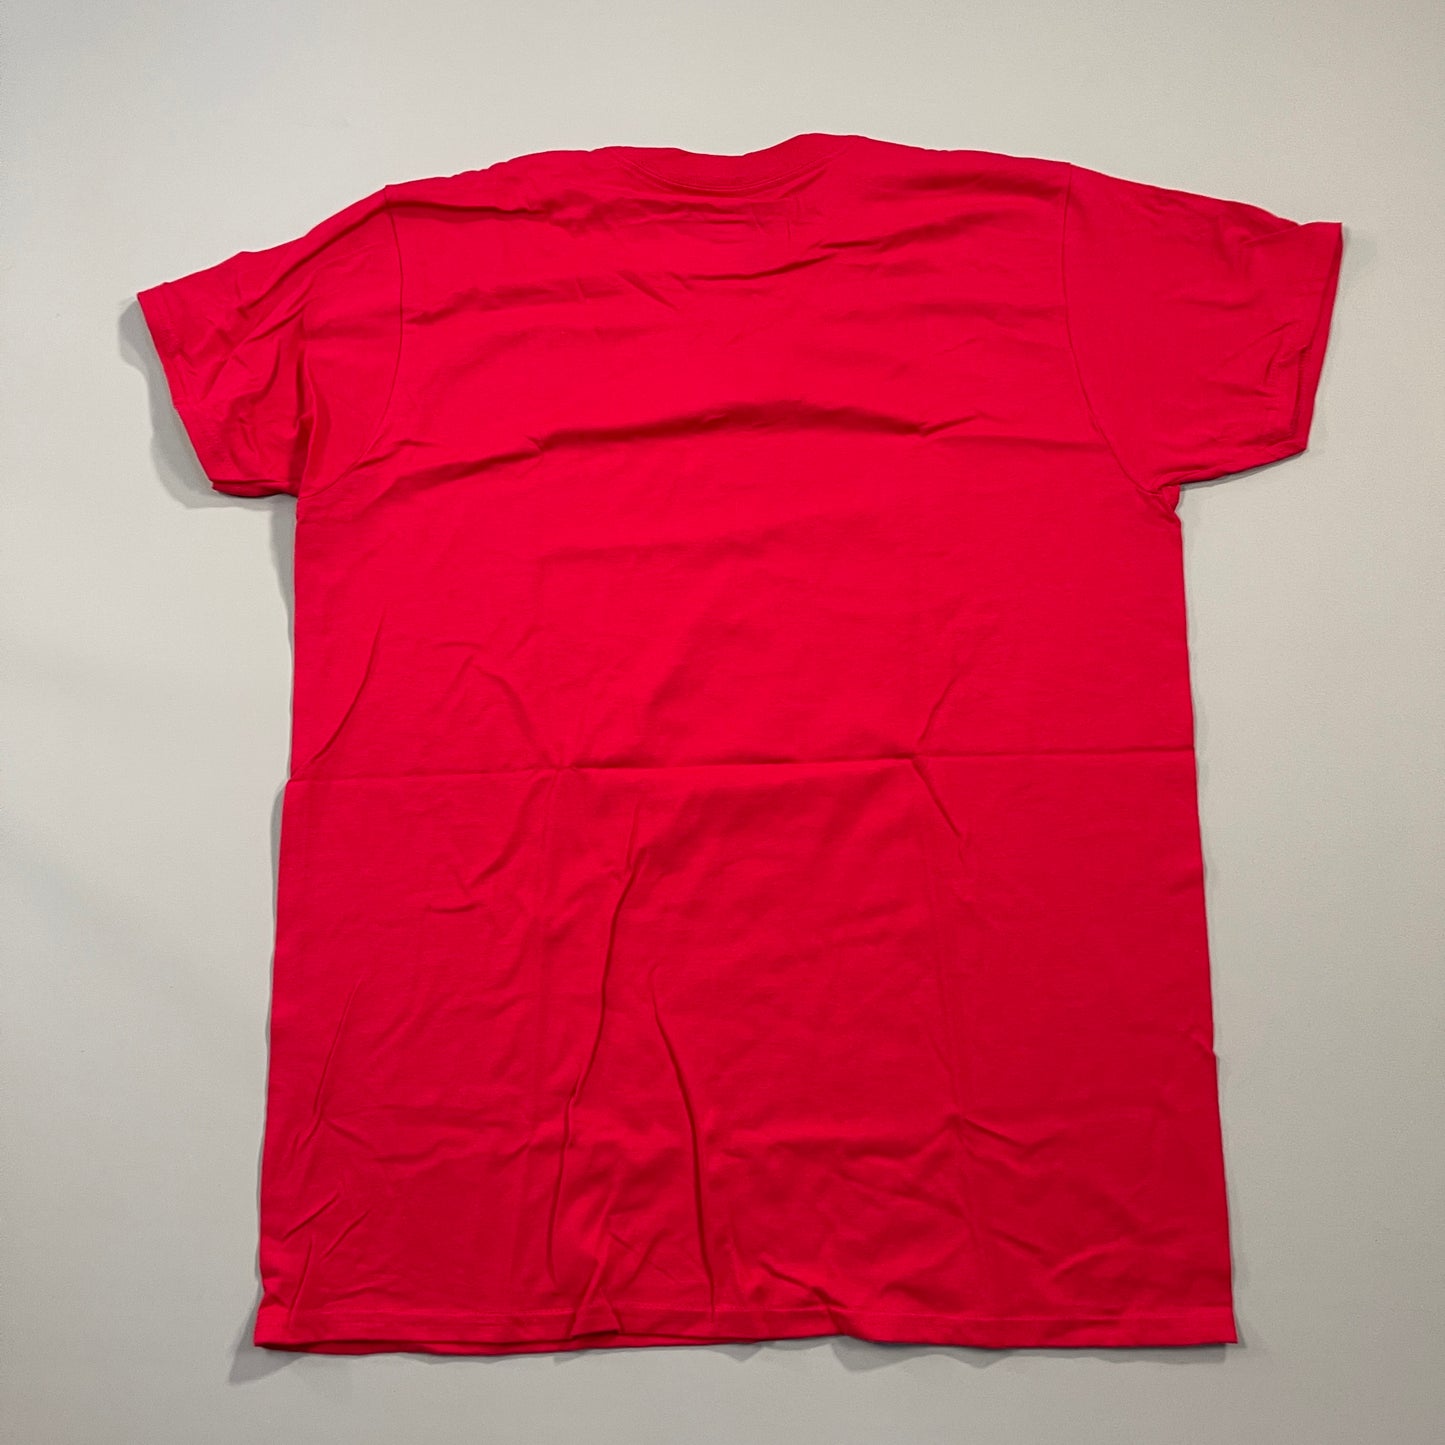 SNAP ON Because I Only Use The Best Tee Shirt Men's Sz L Red (New Other)